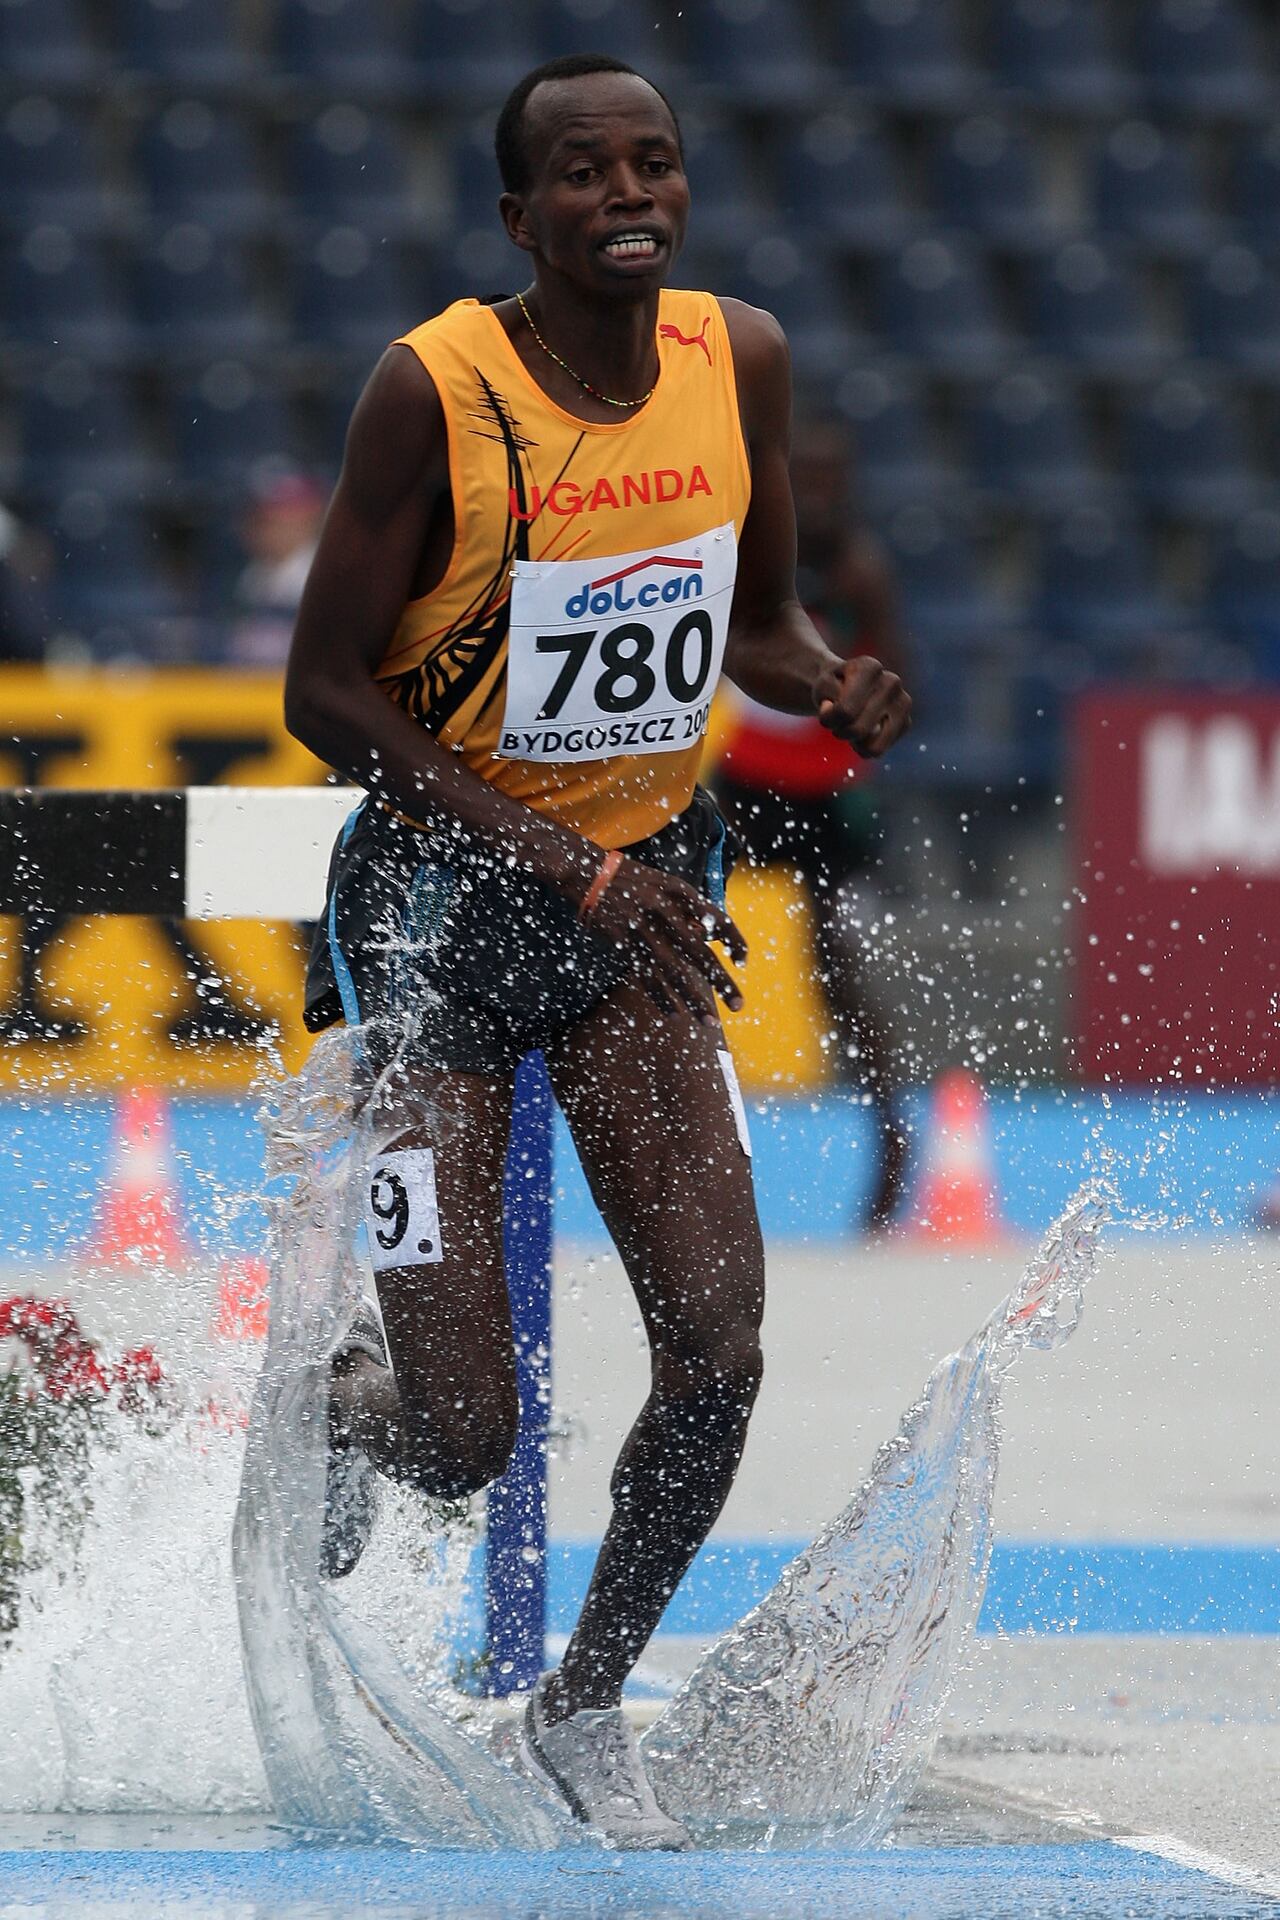 BYDGOSZCZ, POLAND - JULY 13:  Benjamin Kiplagat of Uganda in action on his way to 2nd place during the final of the men's 300m steeplechase with Dereje Abdi of Ethiopia following during day six of the 12th IAAF World Junior Championships at the Zawisca Stadium on July 13, 2008 in Bydgoszcz, Poland.  (Photo by Hamish Blair/Getty Images)